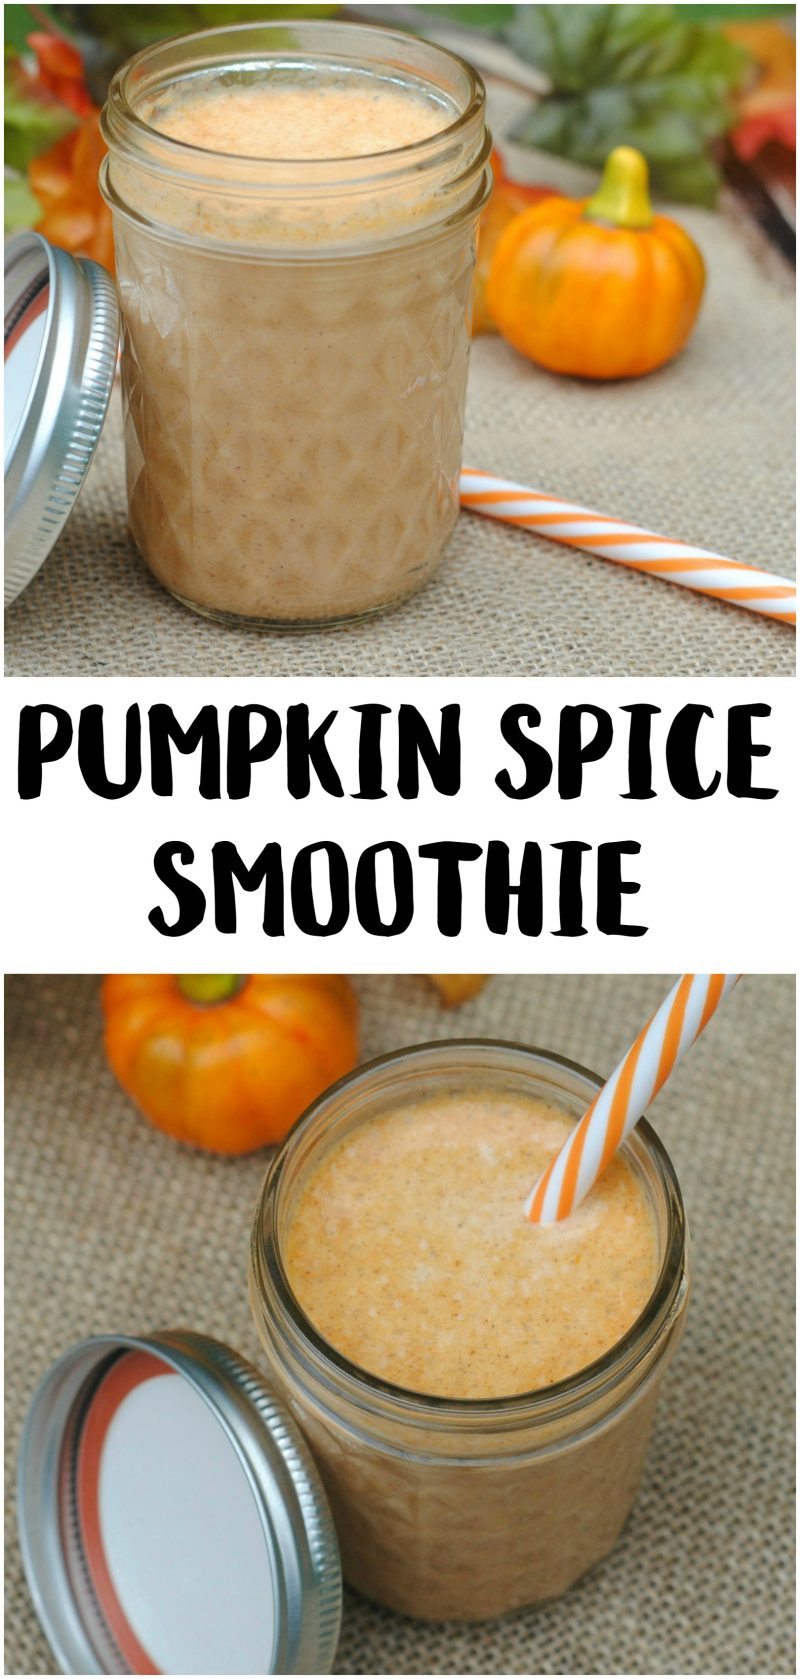 Are you ready for Pumpkin Spice everything? If you aren’t already sick of it from your coffee creamer and cupcakes, be sure to try this easy DIY Pumpkin Spice Smoothie Recipe! It includes real pumpkin and is one of the best ways to enjoy pumpkin spice {especially if it’s still warm where you are!} and it’s even kid approved!